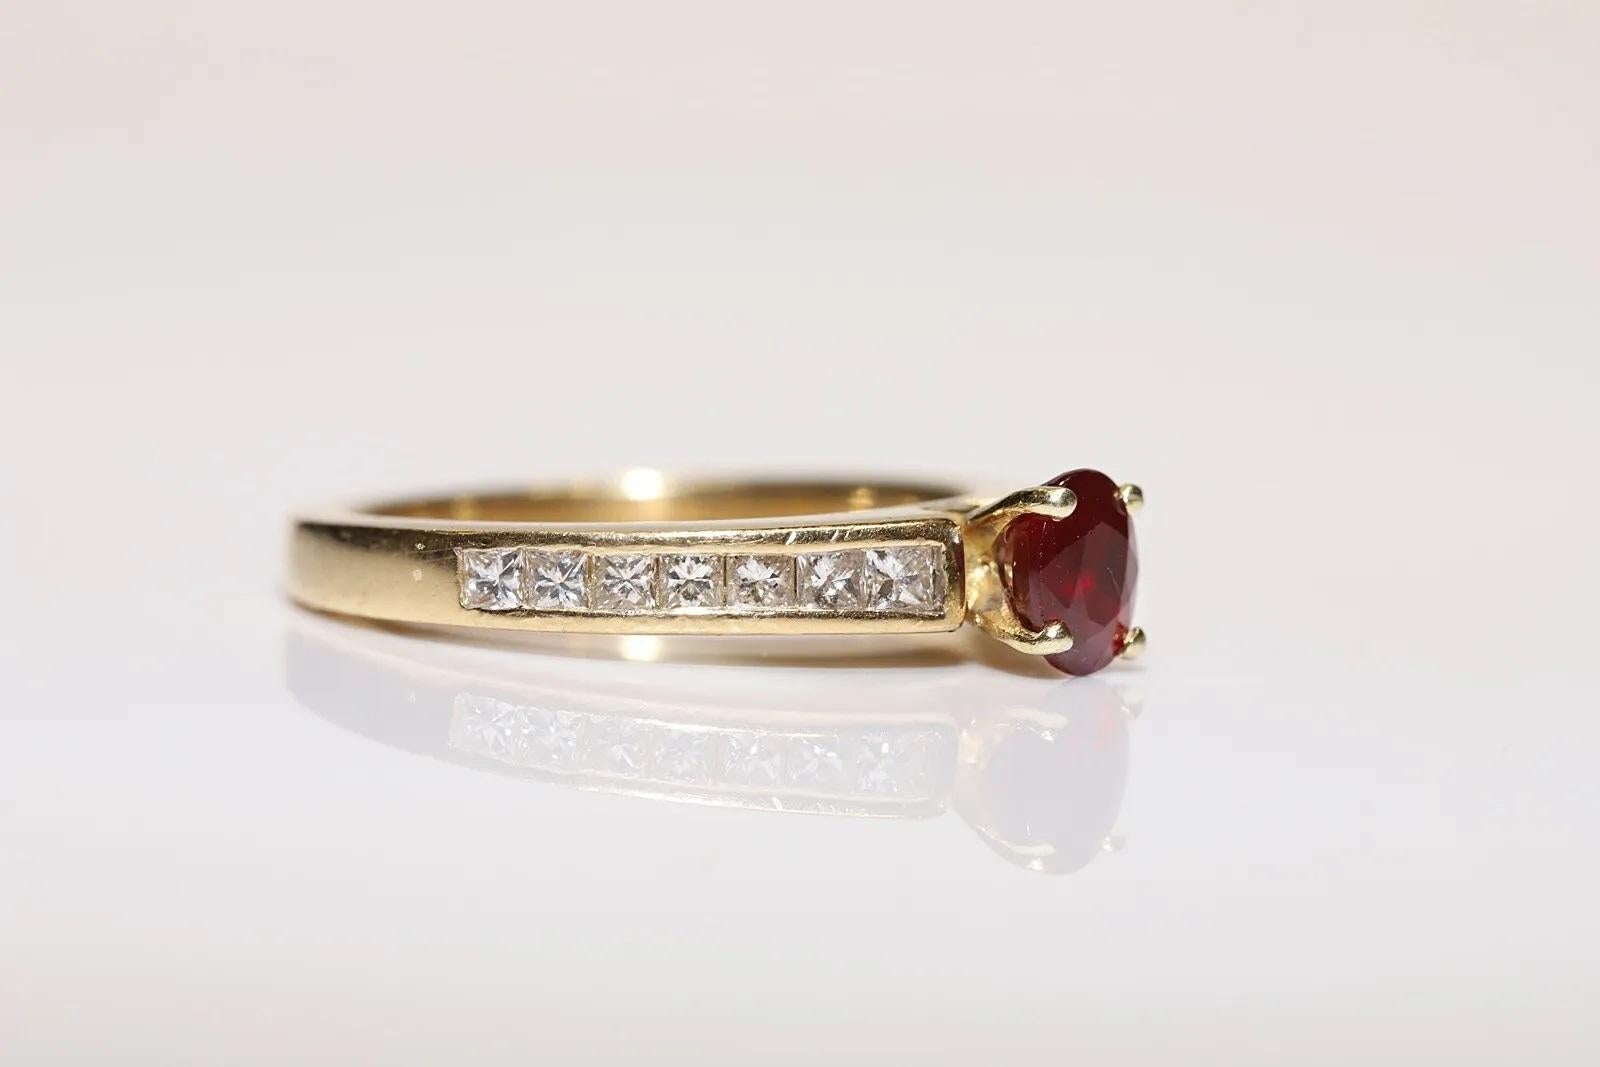 Vintage Circa 1980s 18k Gold Natural Baguette Cut Diamond And Ruby Ring  In Good Condition For Sale In Fatih/İstanbul, 34